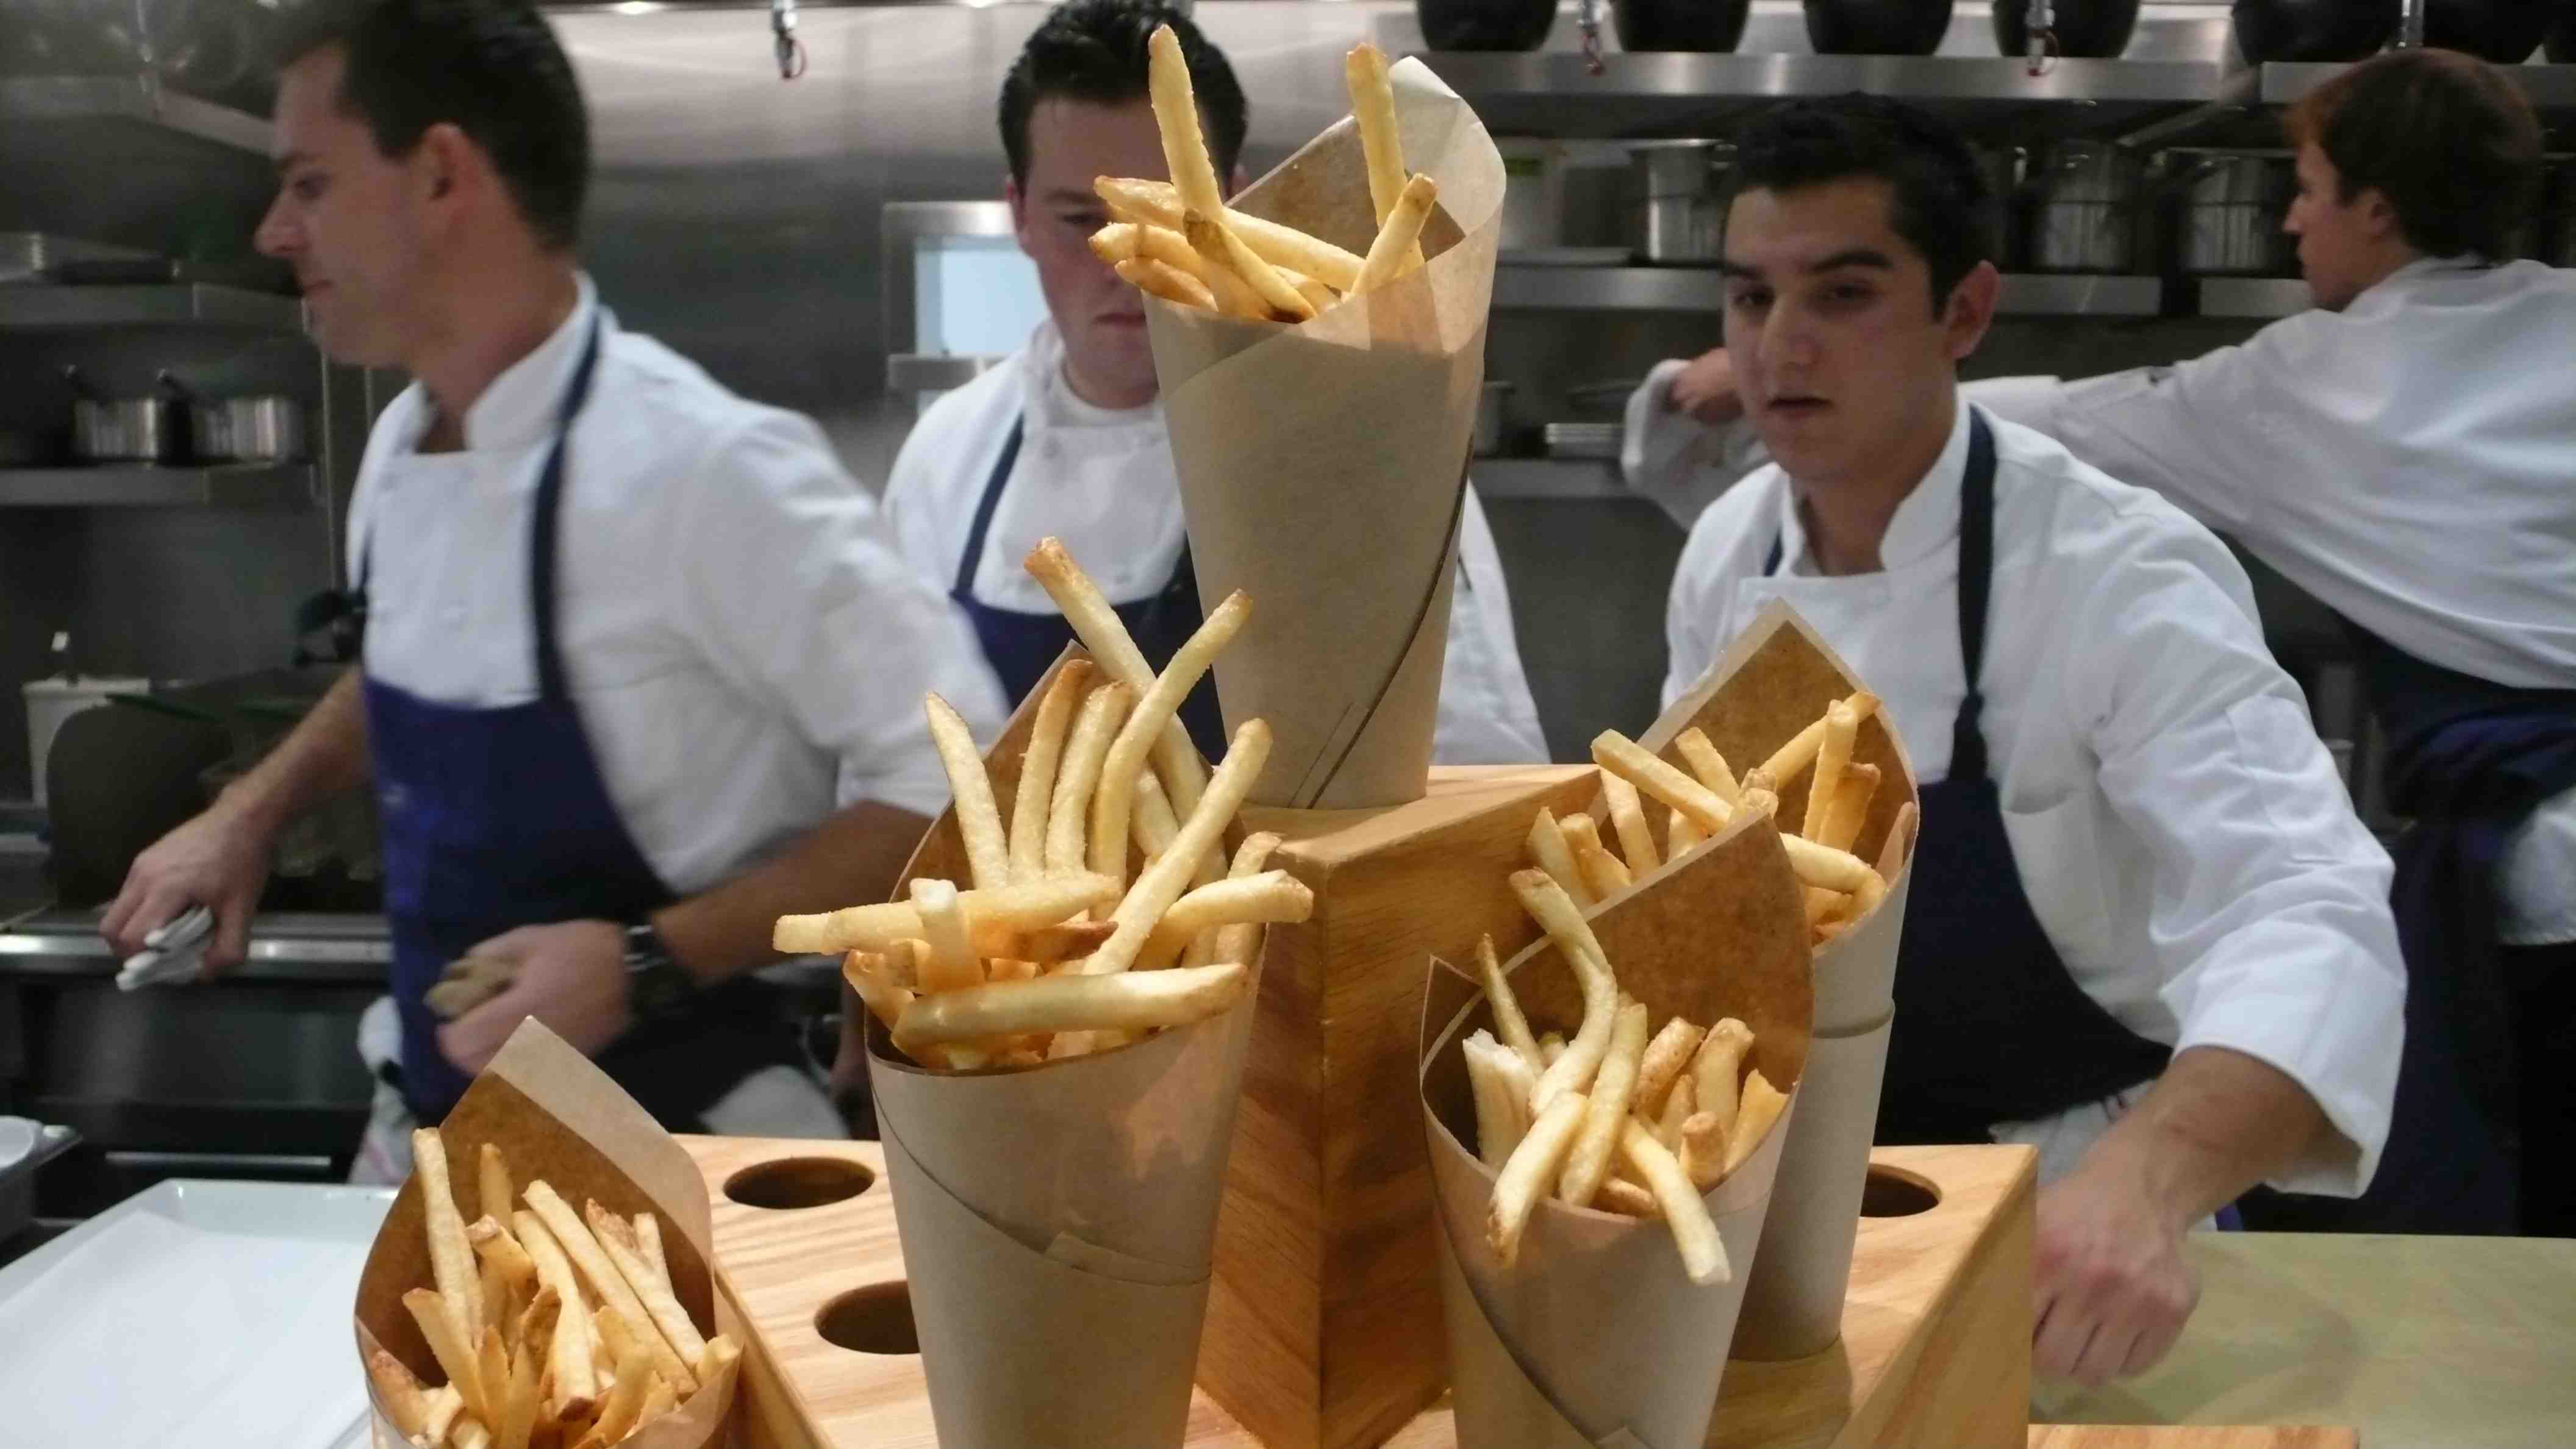 A tower of French Fries